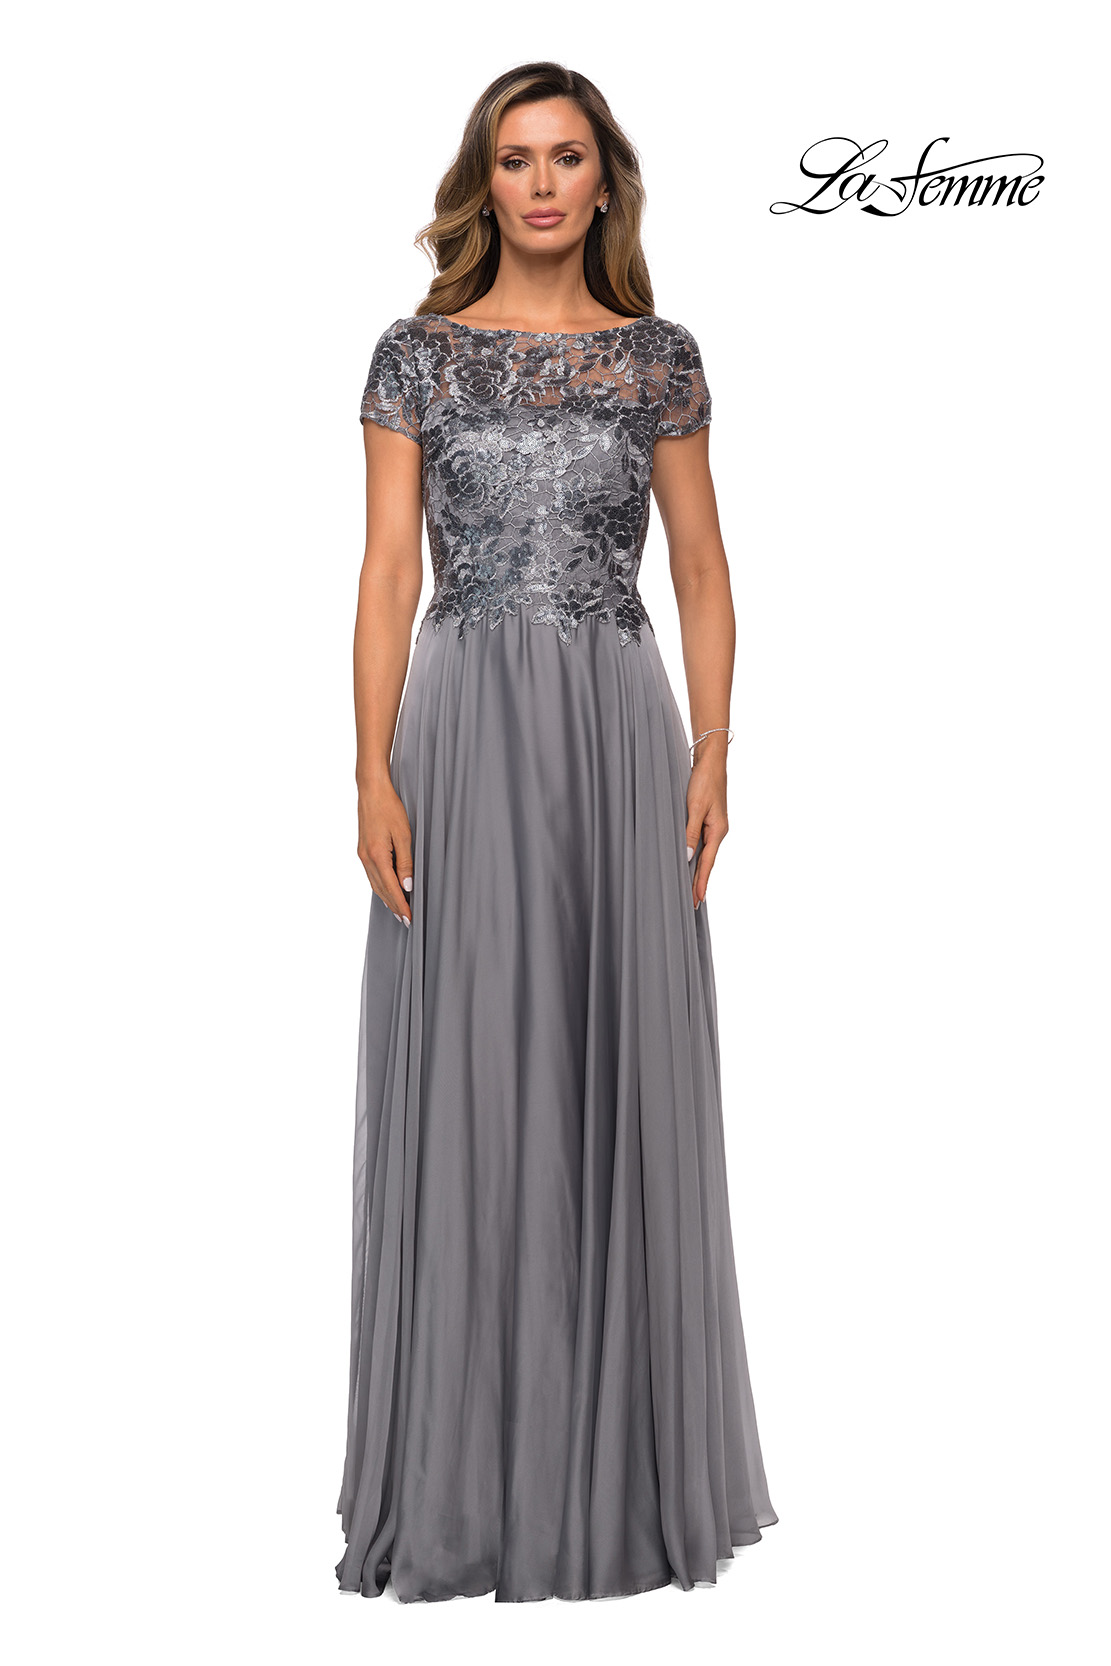 Silver Chiffon and Sequin Mother of the Bride Dress Style 27924